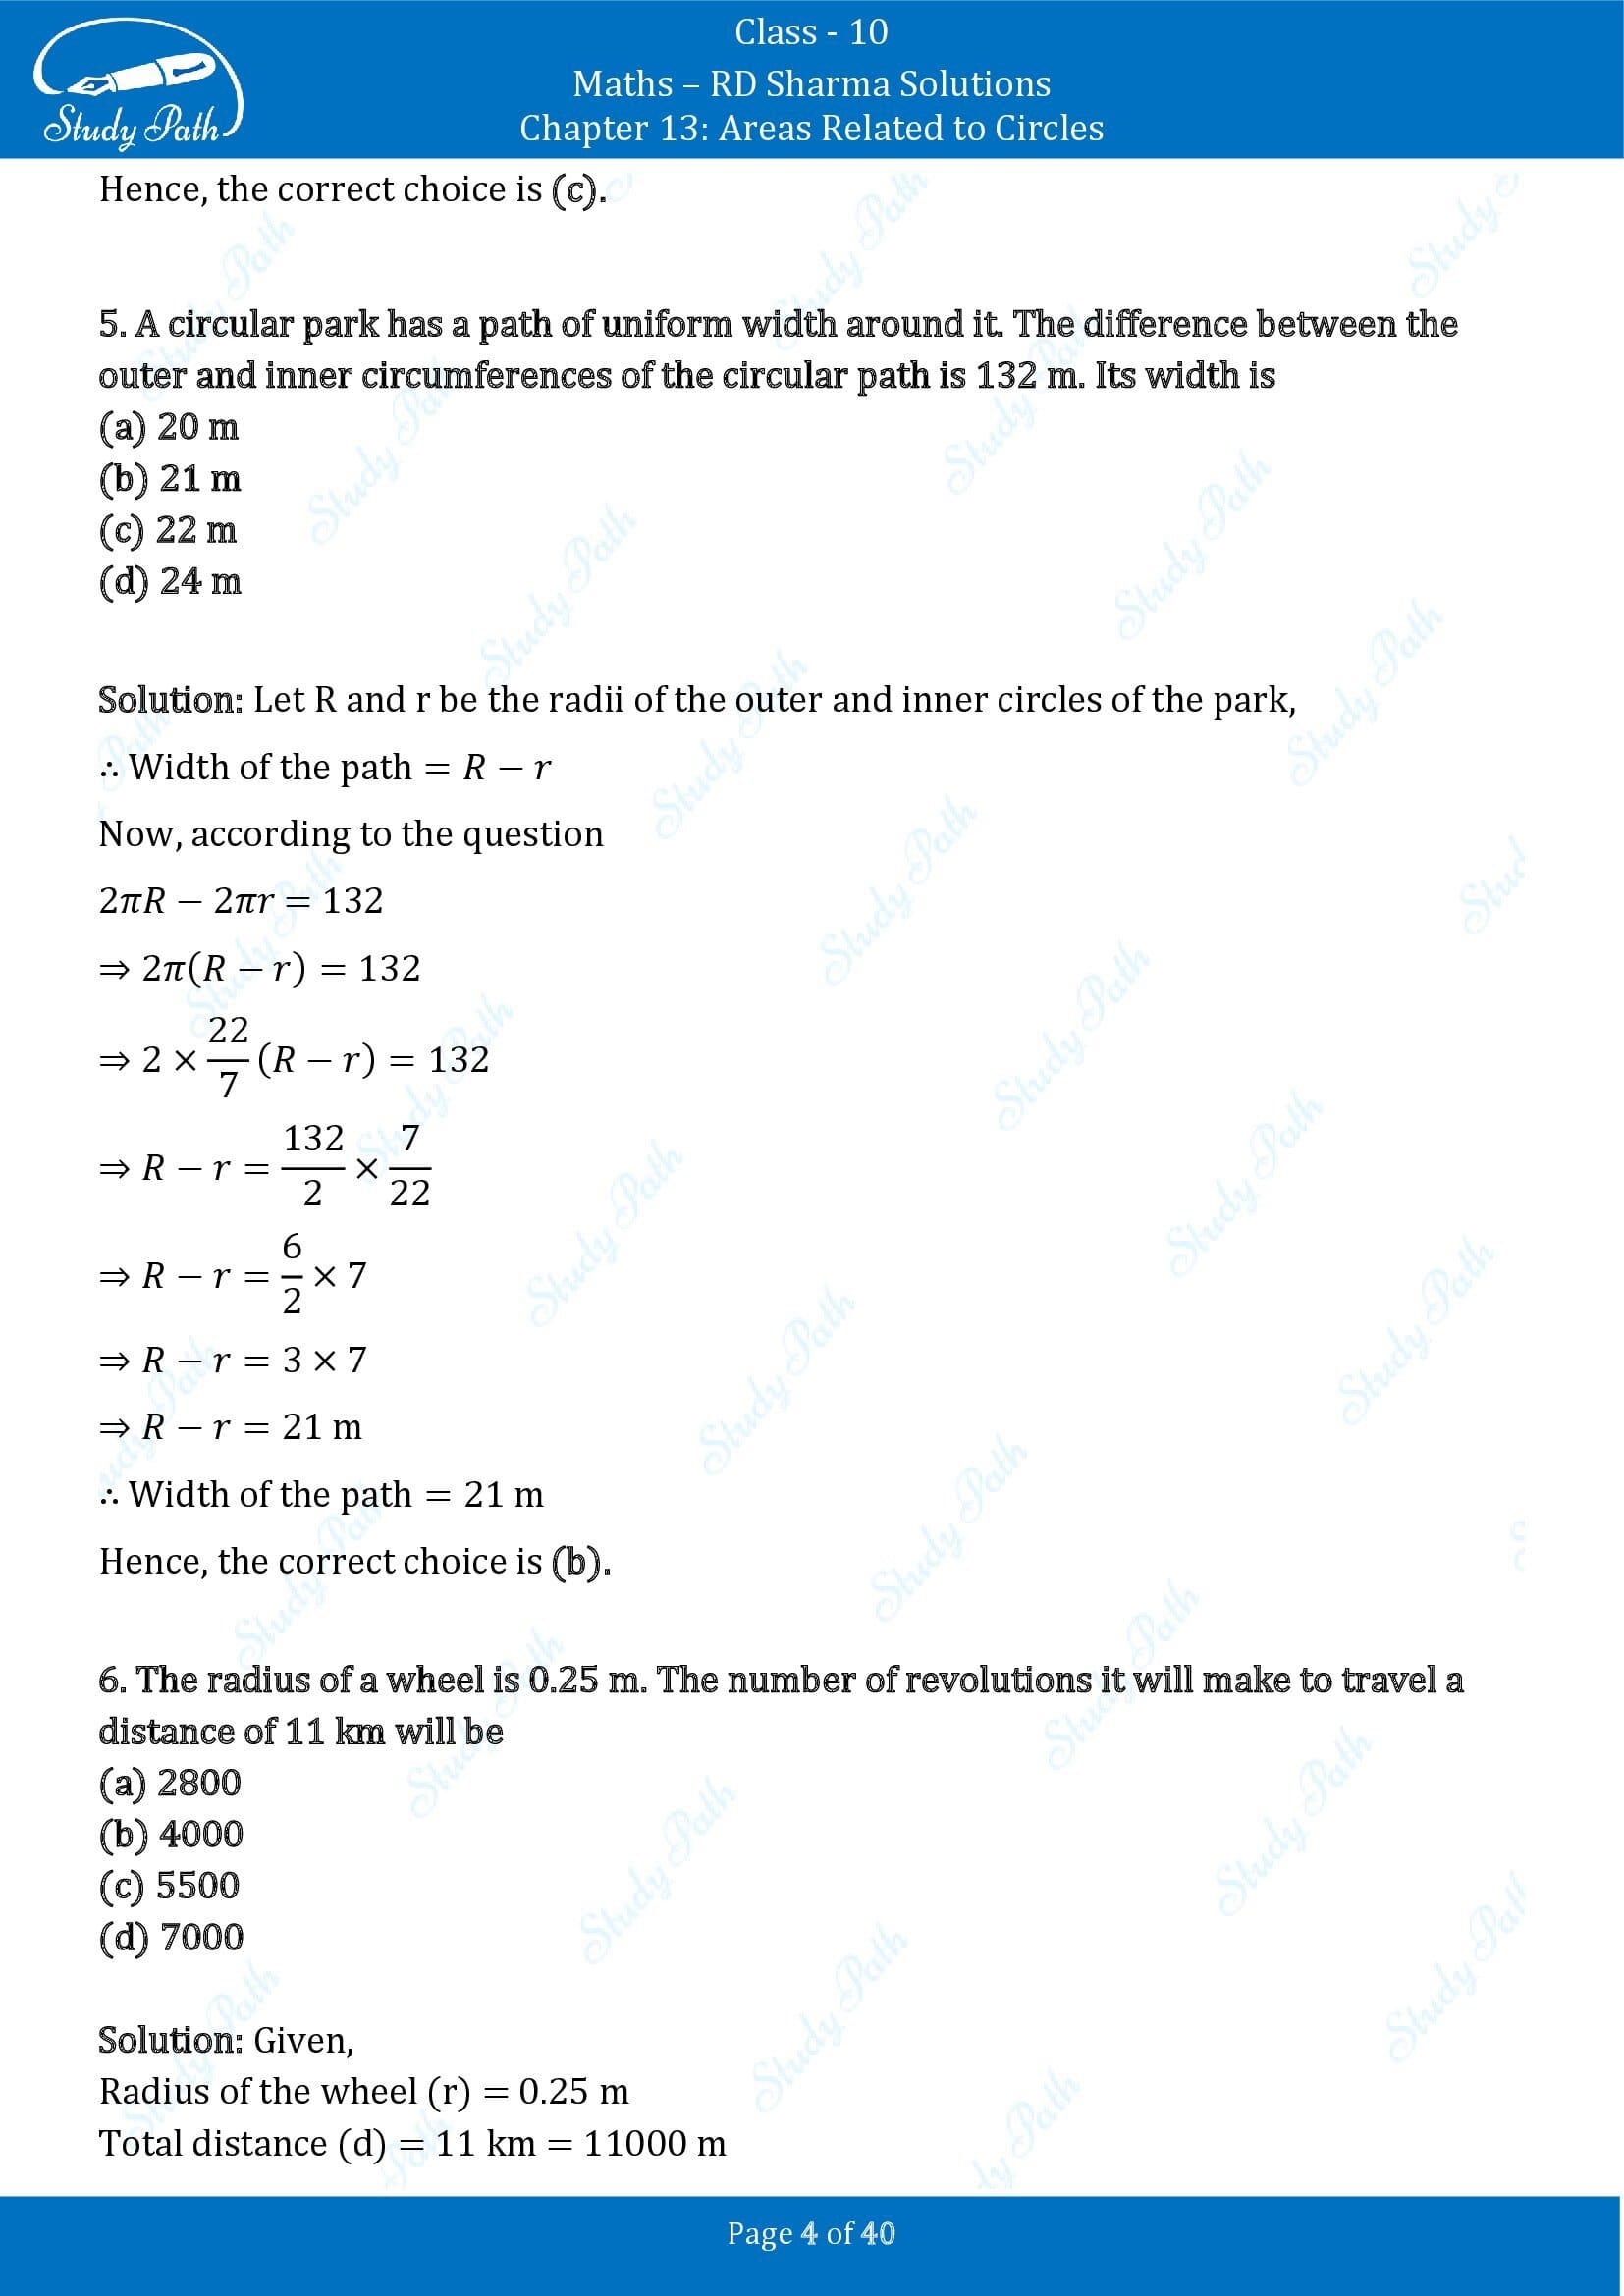 RD Sharma Solutions Class 10 Chapter 13 Areas Related to Circles Multiple Choice Question MCQs 00004